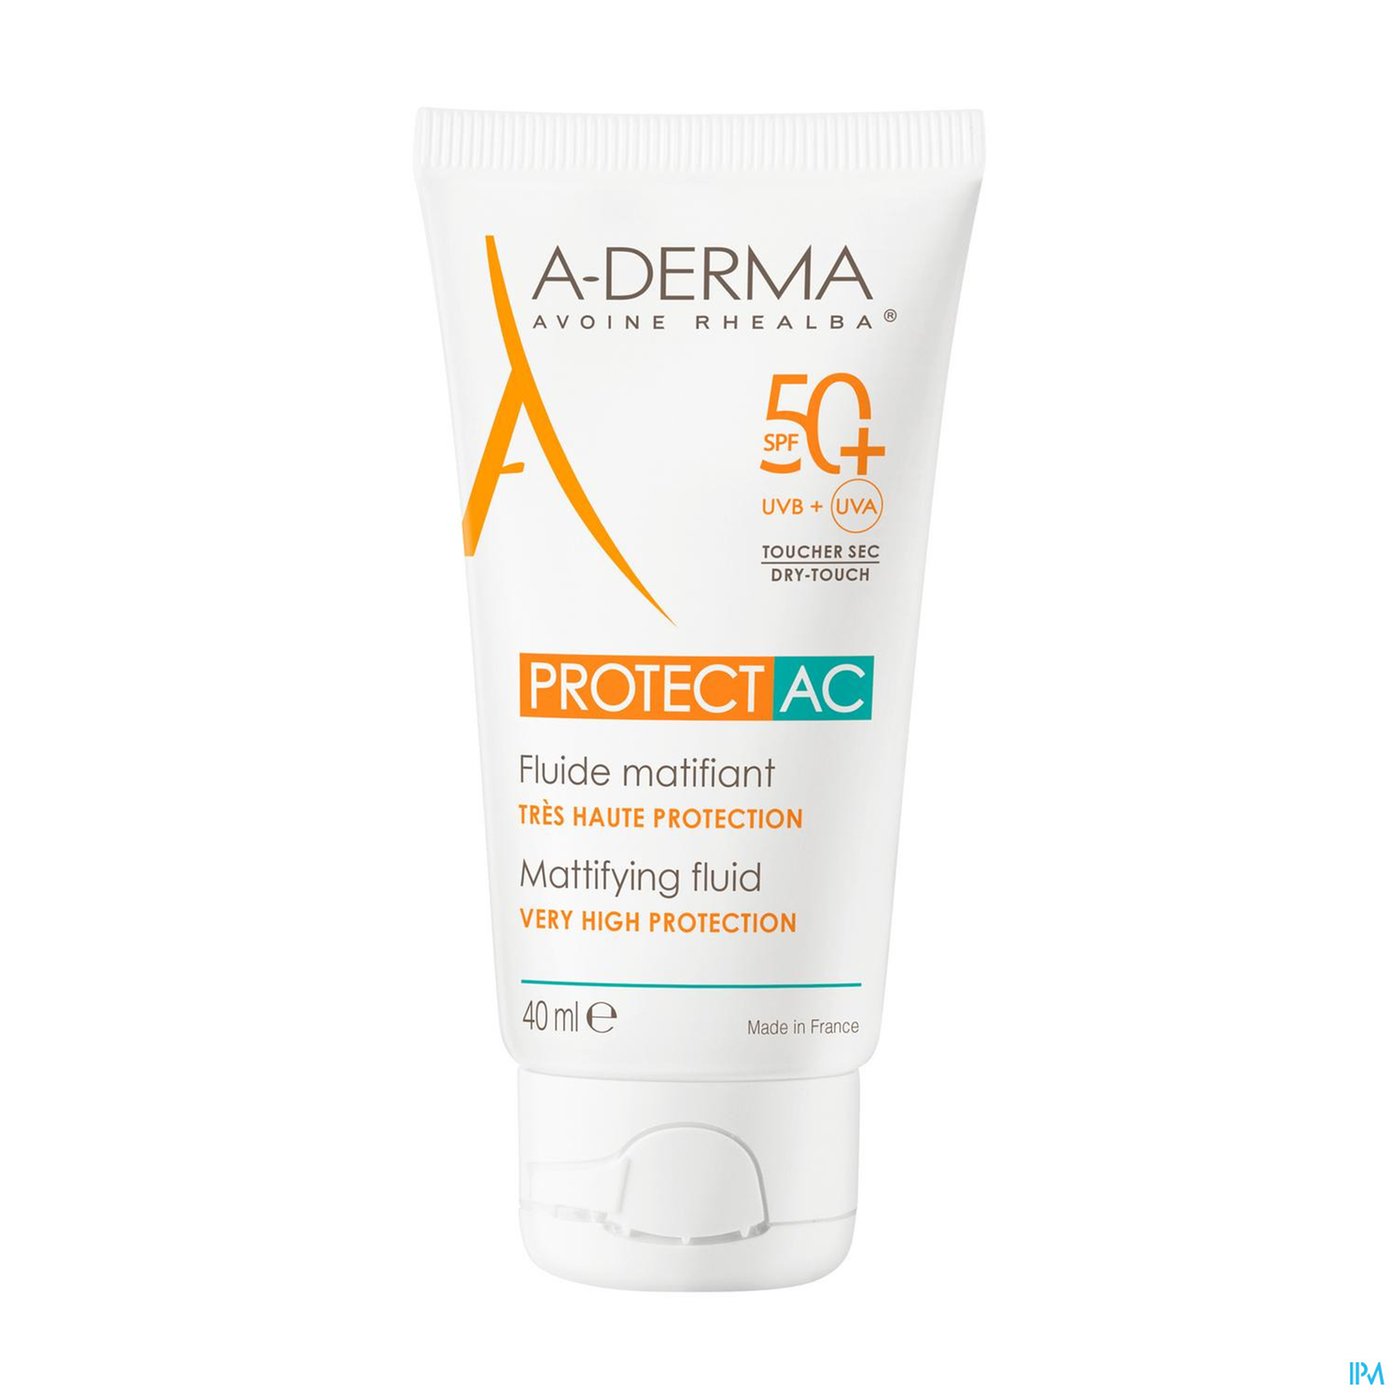 Aderma Protect Ac Fluide Matterend Spf50+ 40ml productshot